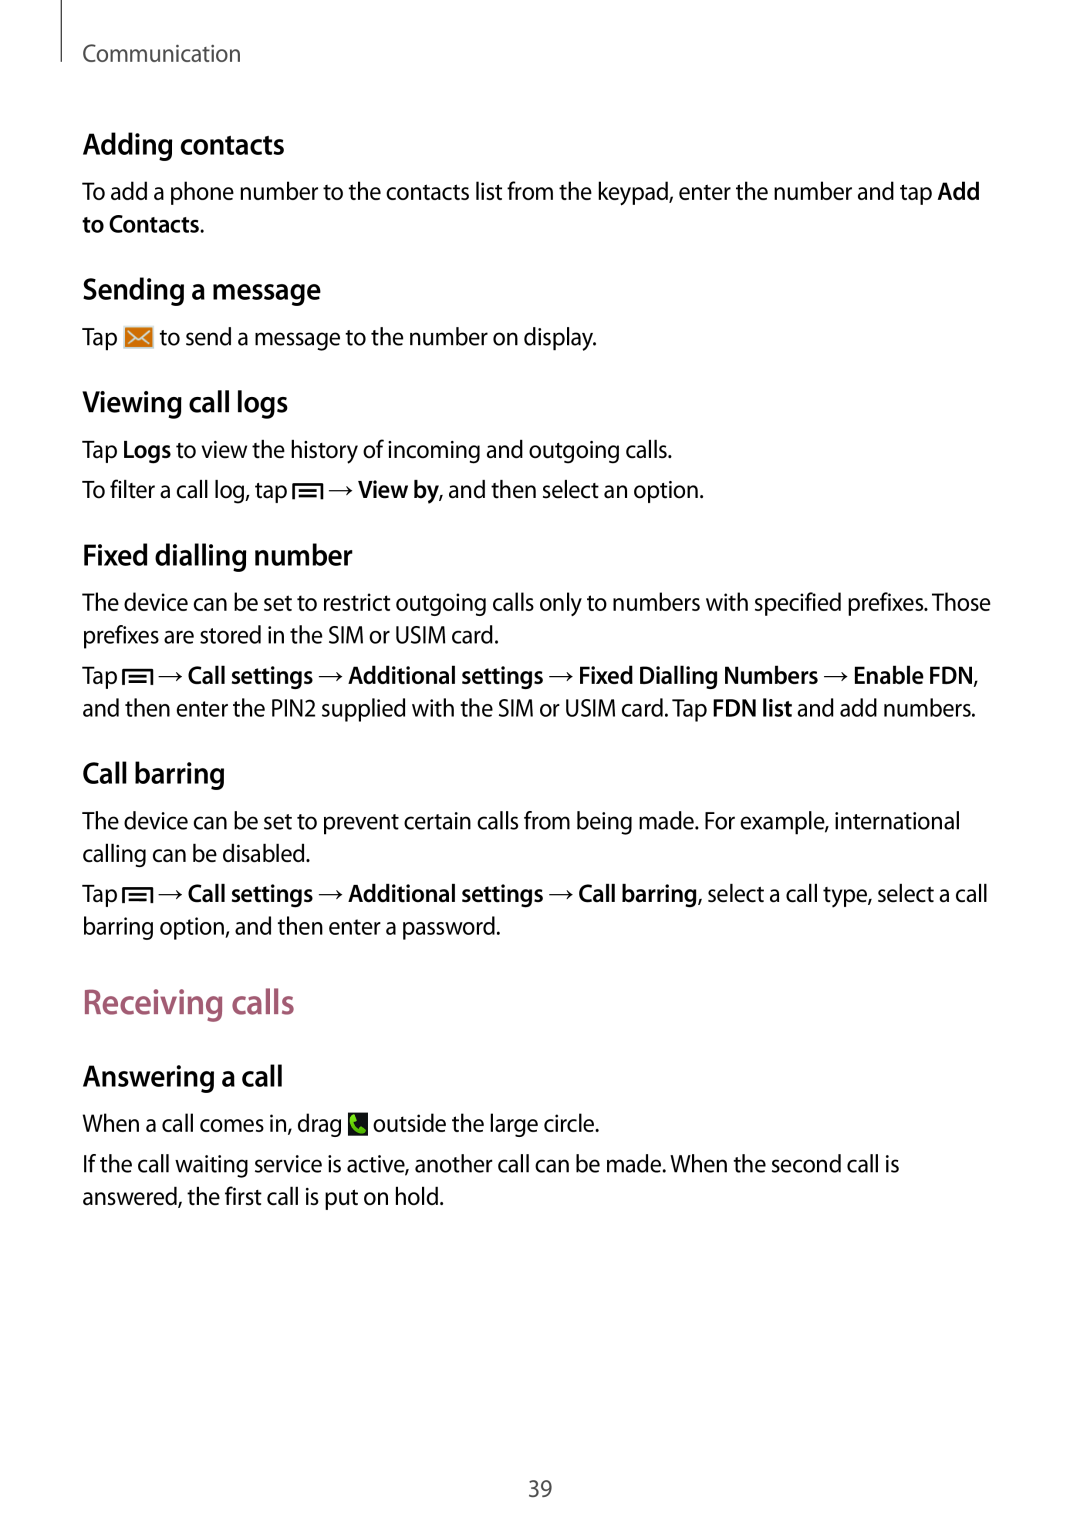 Samsung GT-S6790PWNSEB manual Receiving calls, Adding contacts, Sending a message, Viewing call logs, Fixed dialling number 